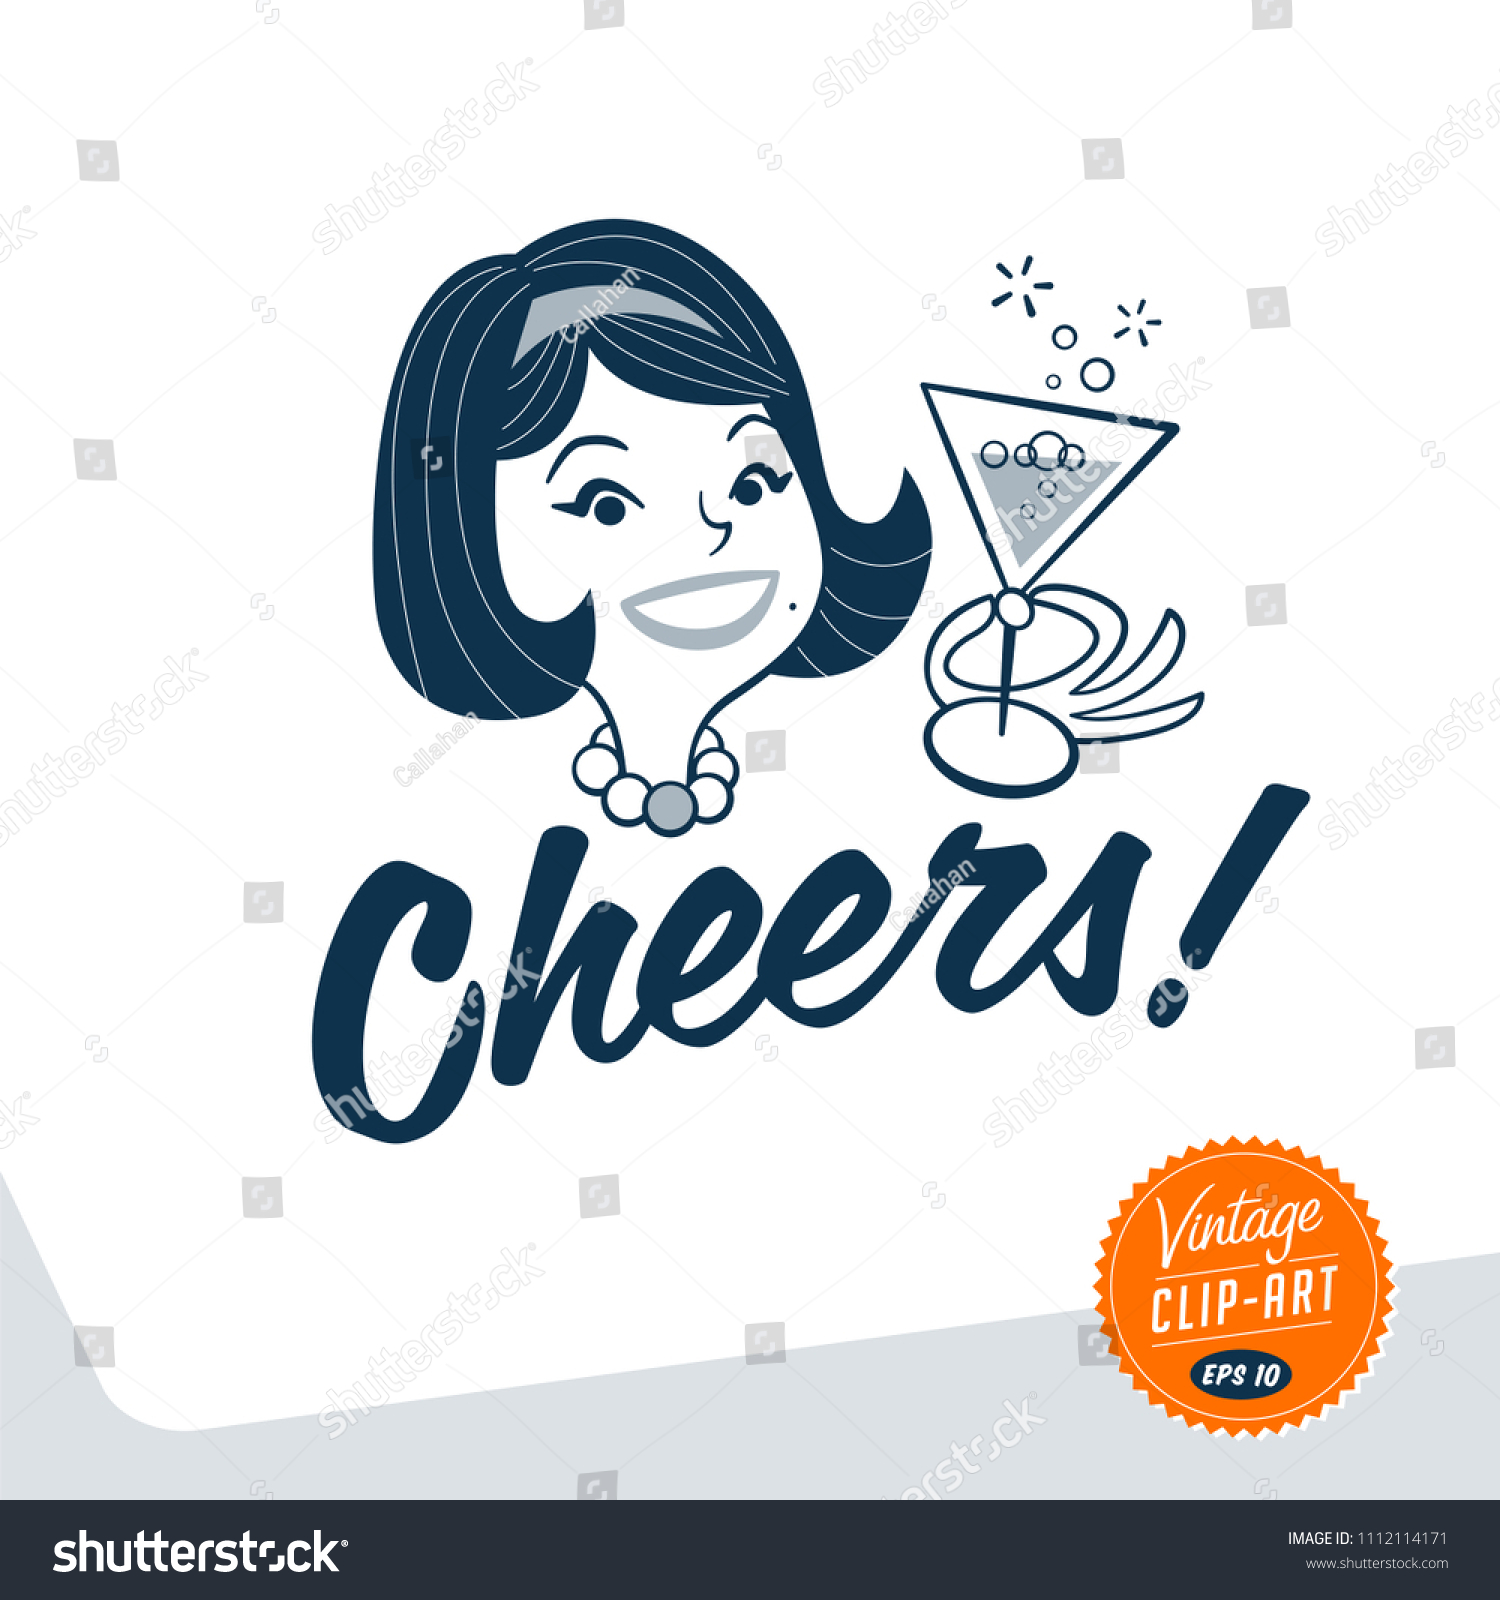 SVG of Vintage style clip art - Mid-century woman holding a glass of champagne and cheering up - Vector EPS10 svg